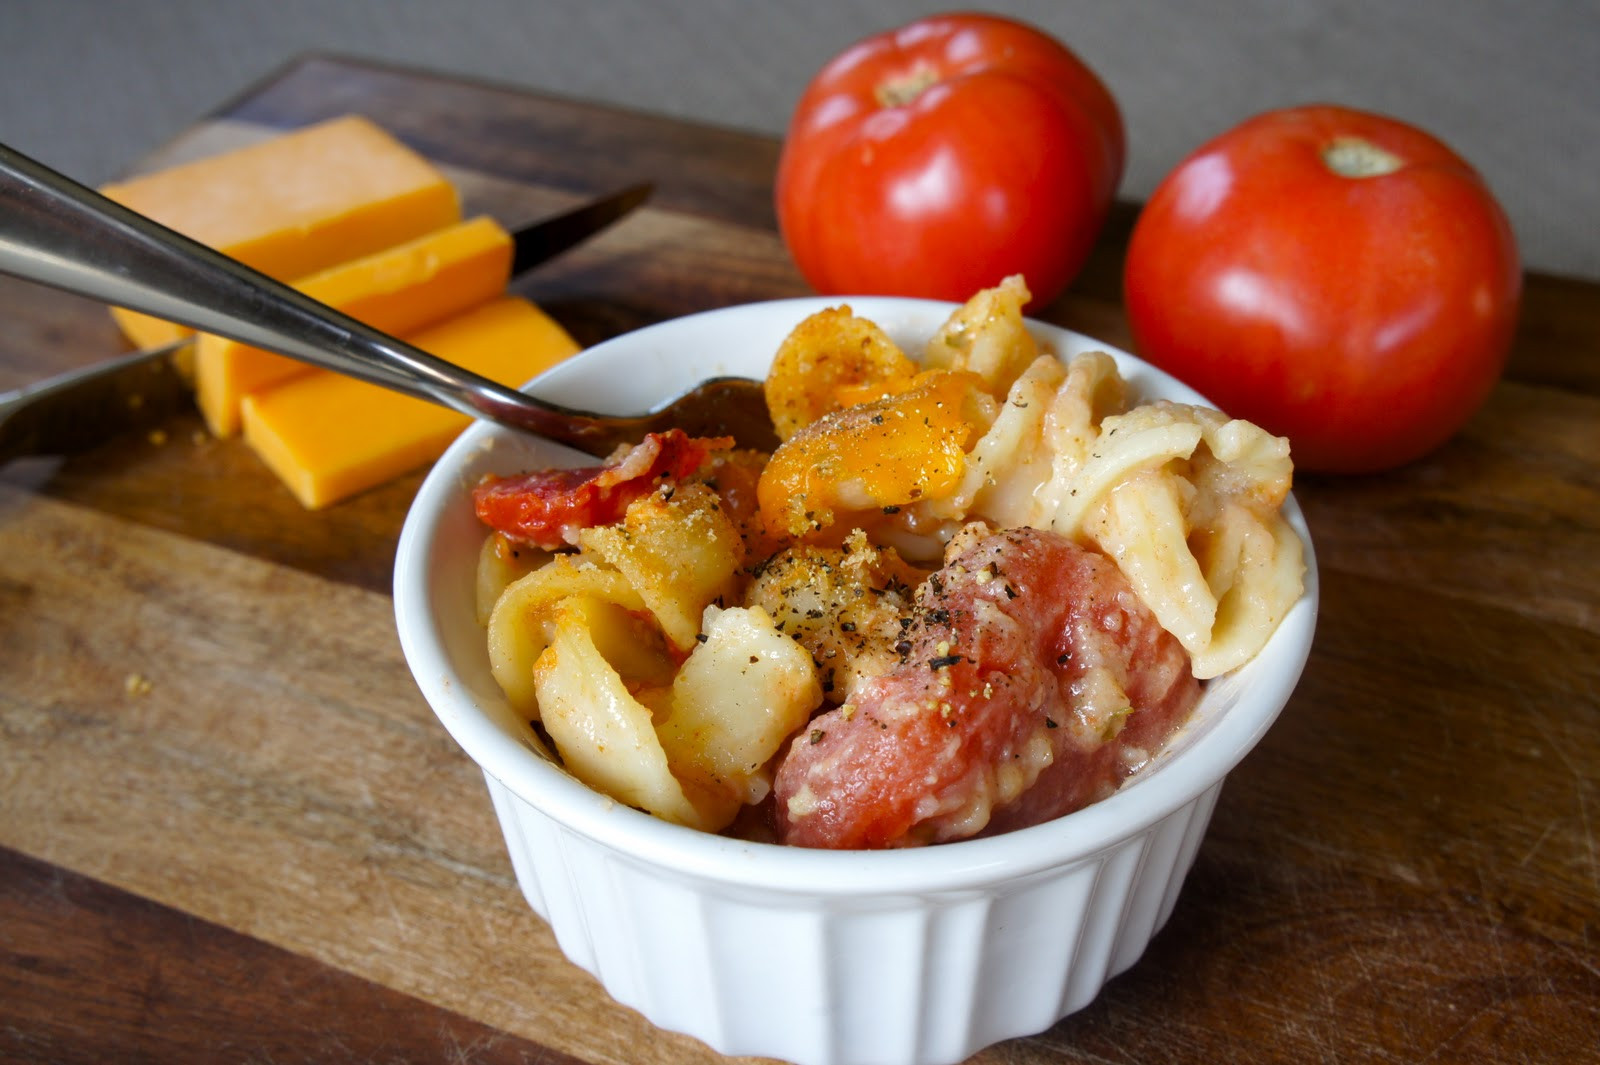 Baked Macaroni And Cheese With Tomato
 Table for Two Baked Macaroni and Cheese with Stewed Tomatoes